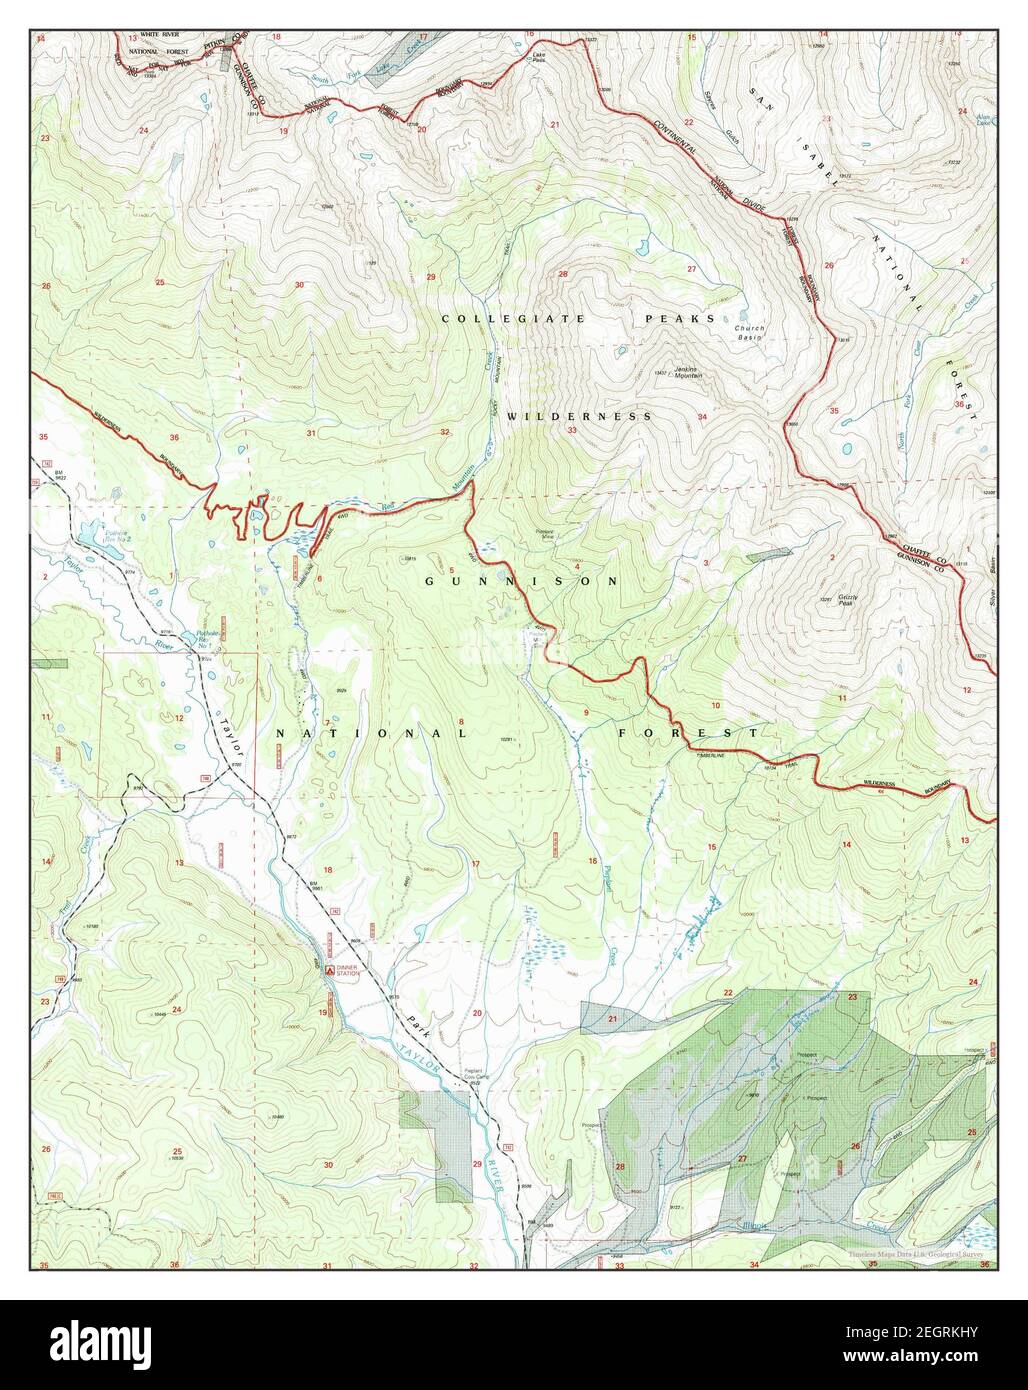 Pieplant, Colorado, map 1994, 1:24000, United States of America by Timeless Maps, data U.S. Geological Survey Stock Photo